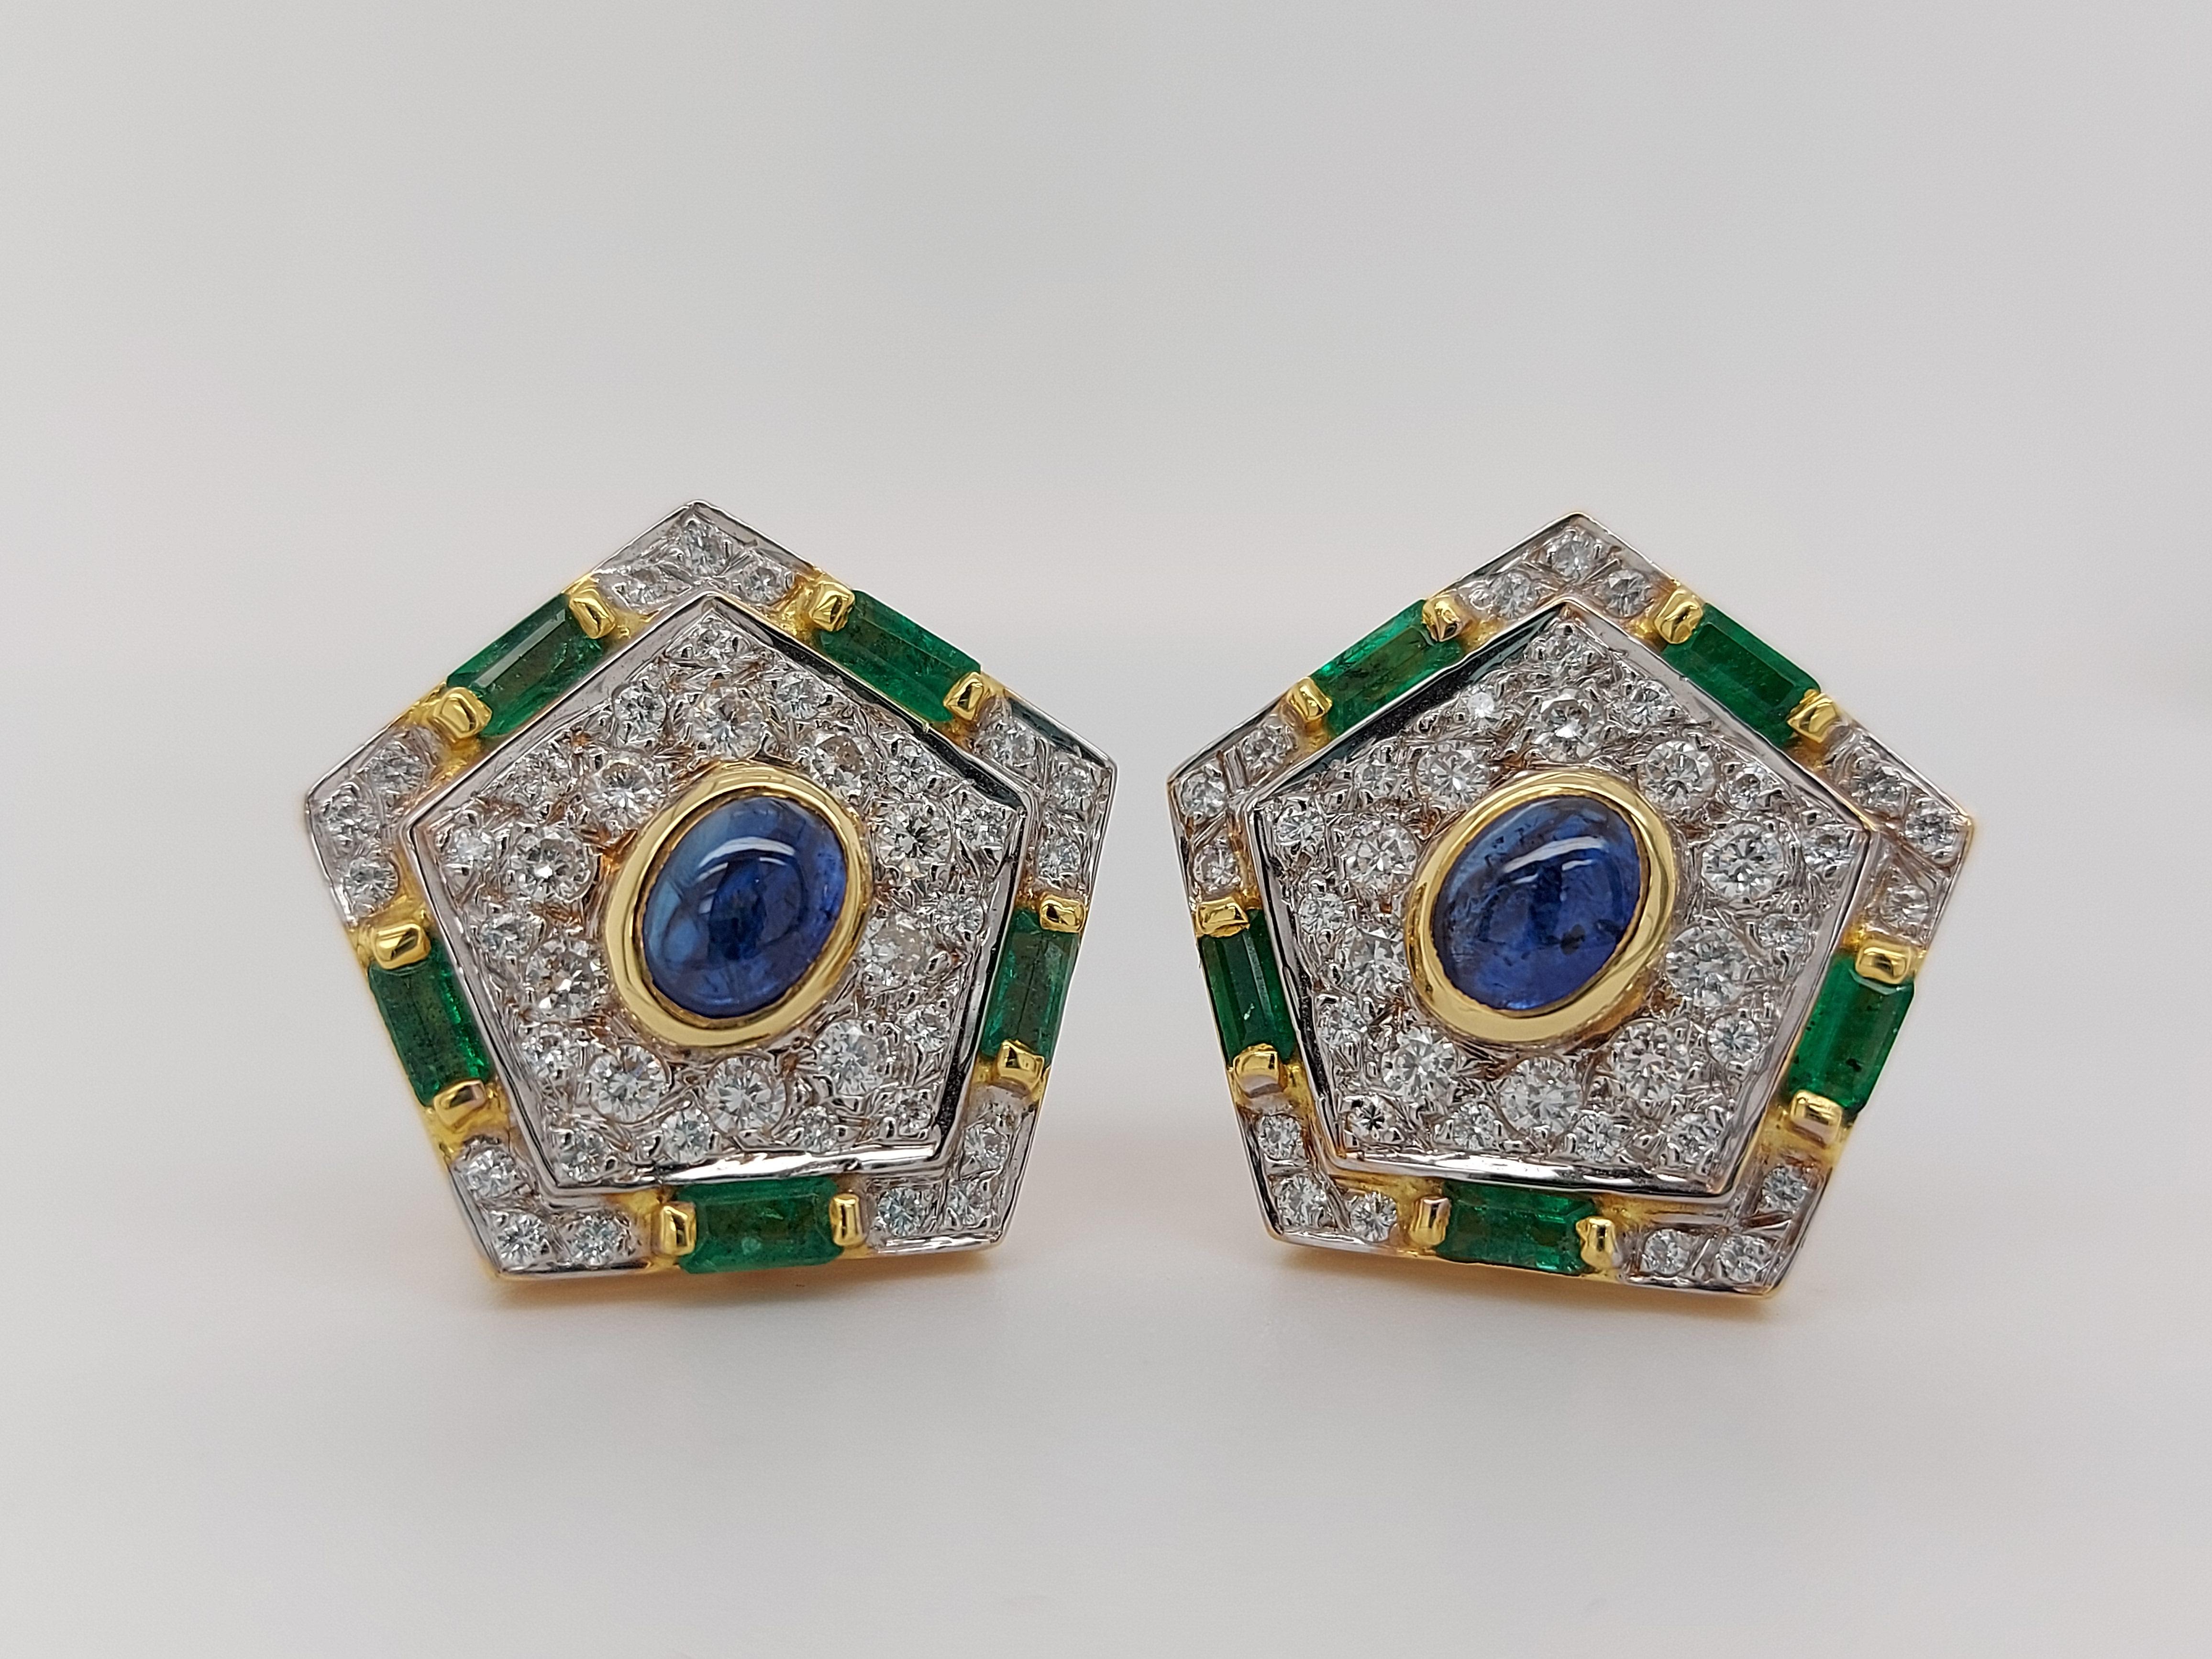 Luxurious Gold Clip-On Earrings With Diamonds, Emerald and Cabochon Sapphire For Sale 3